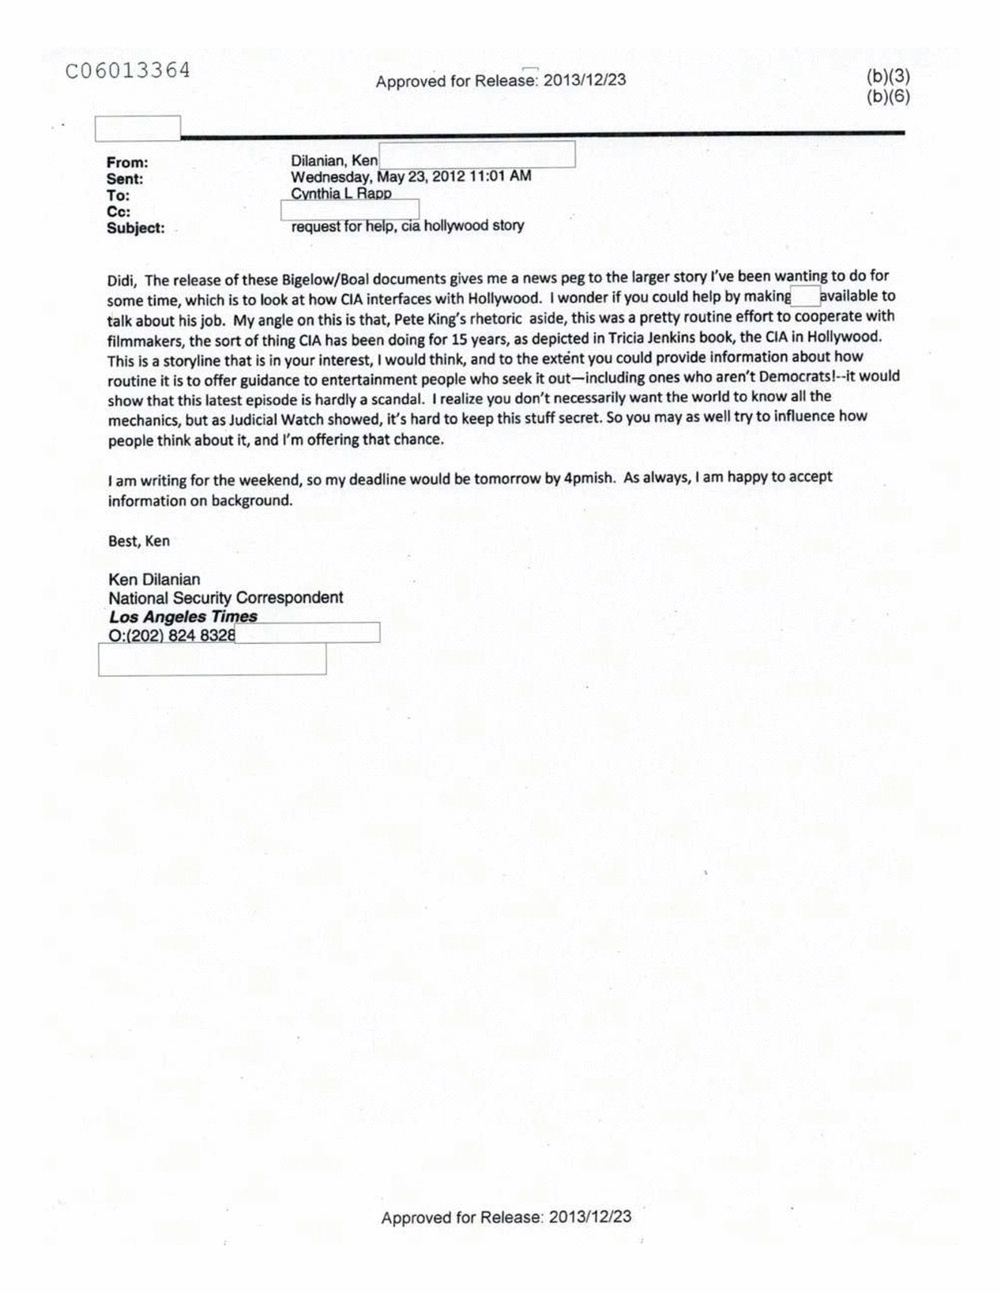 Page 289 from Email Correspondence Between Reporters and CIA Flacks